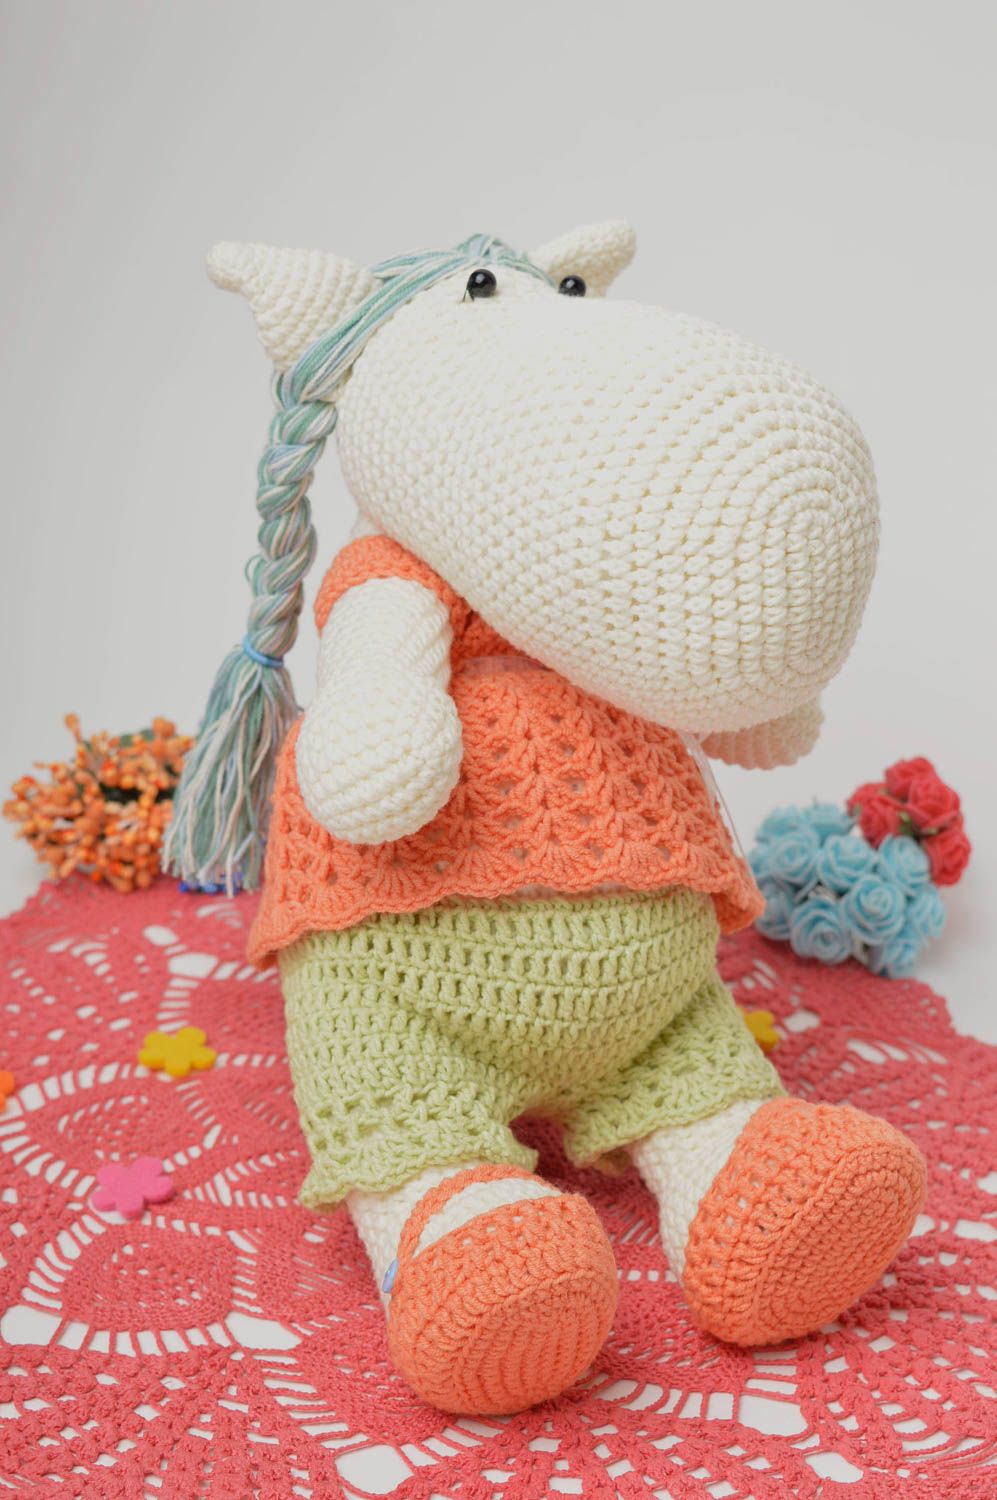 Handmade crochet toy unusual toys for kids decorative use only gift ideas photo 1